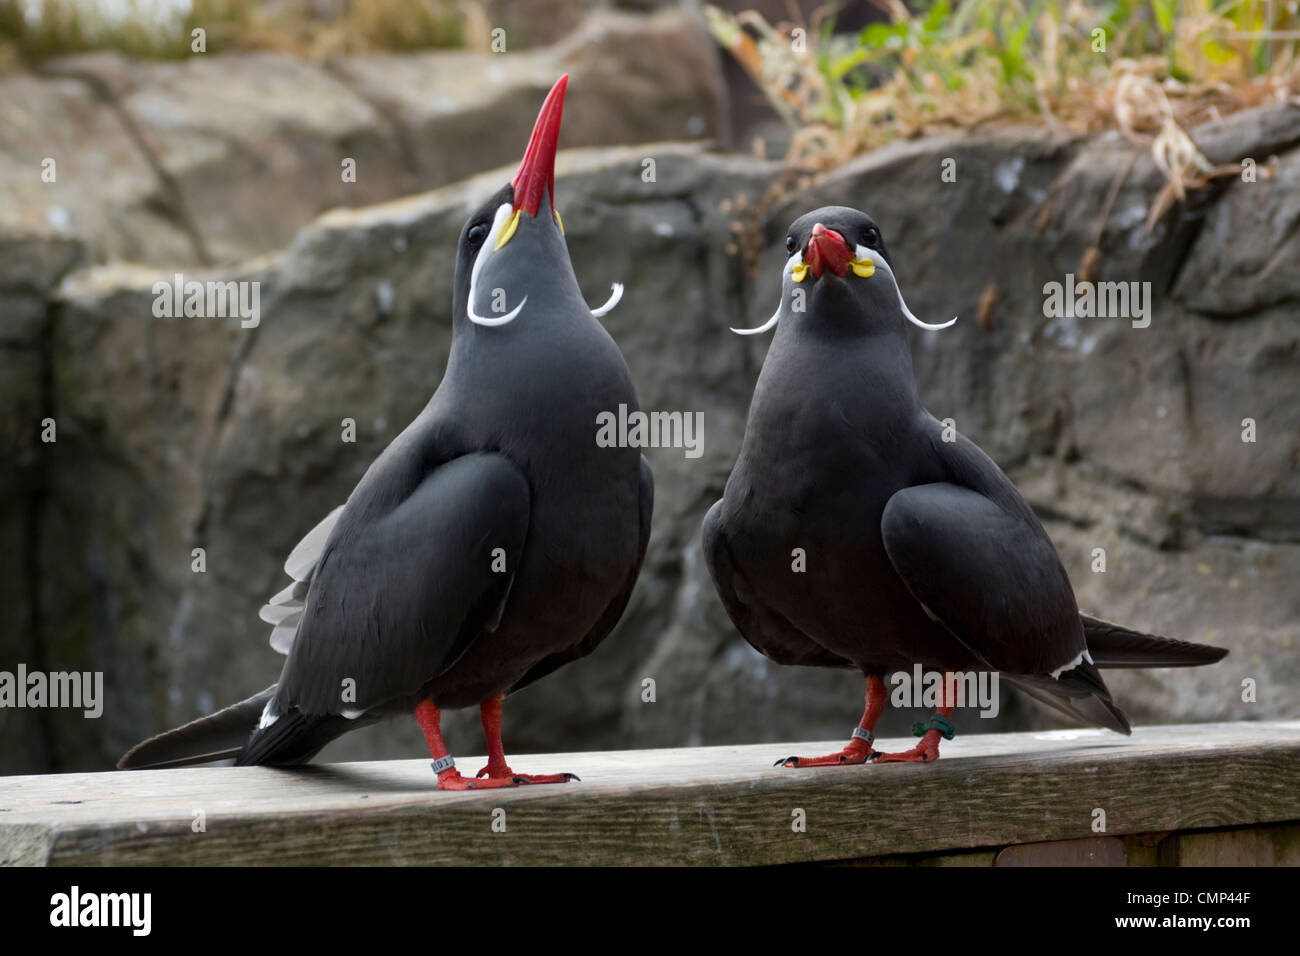 Pair of Inca terns courting Stock Photo